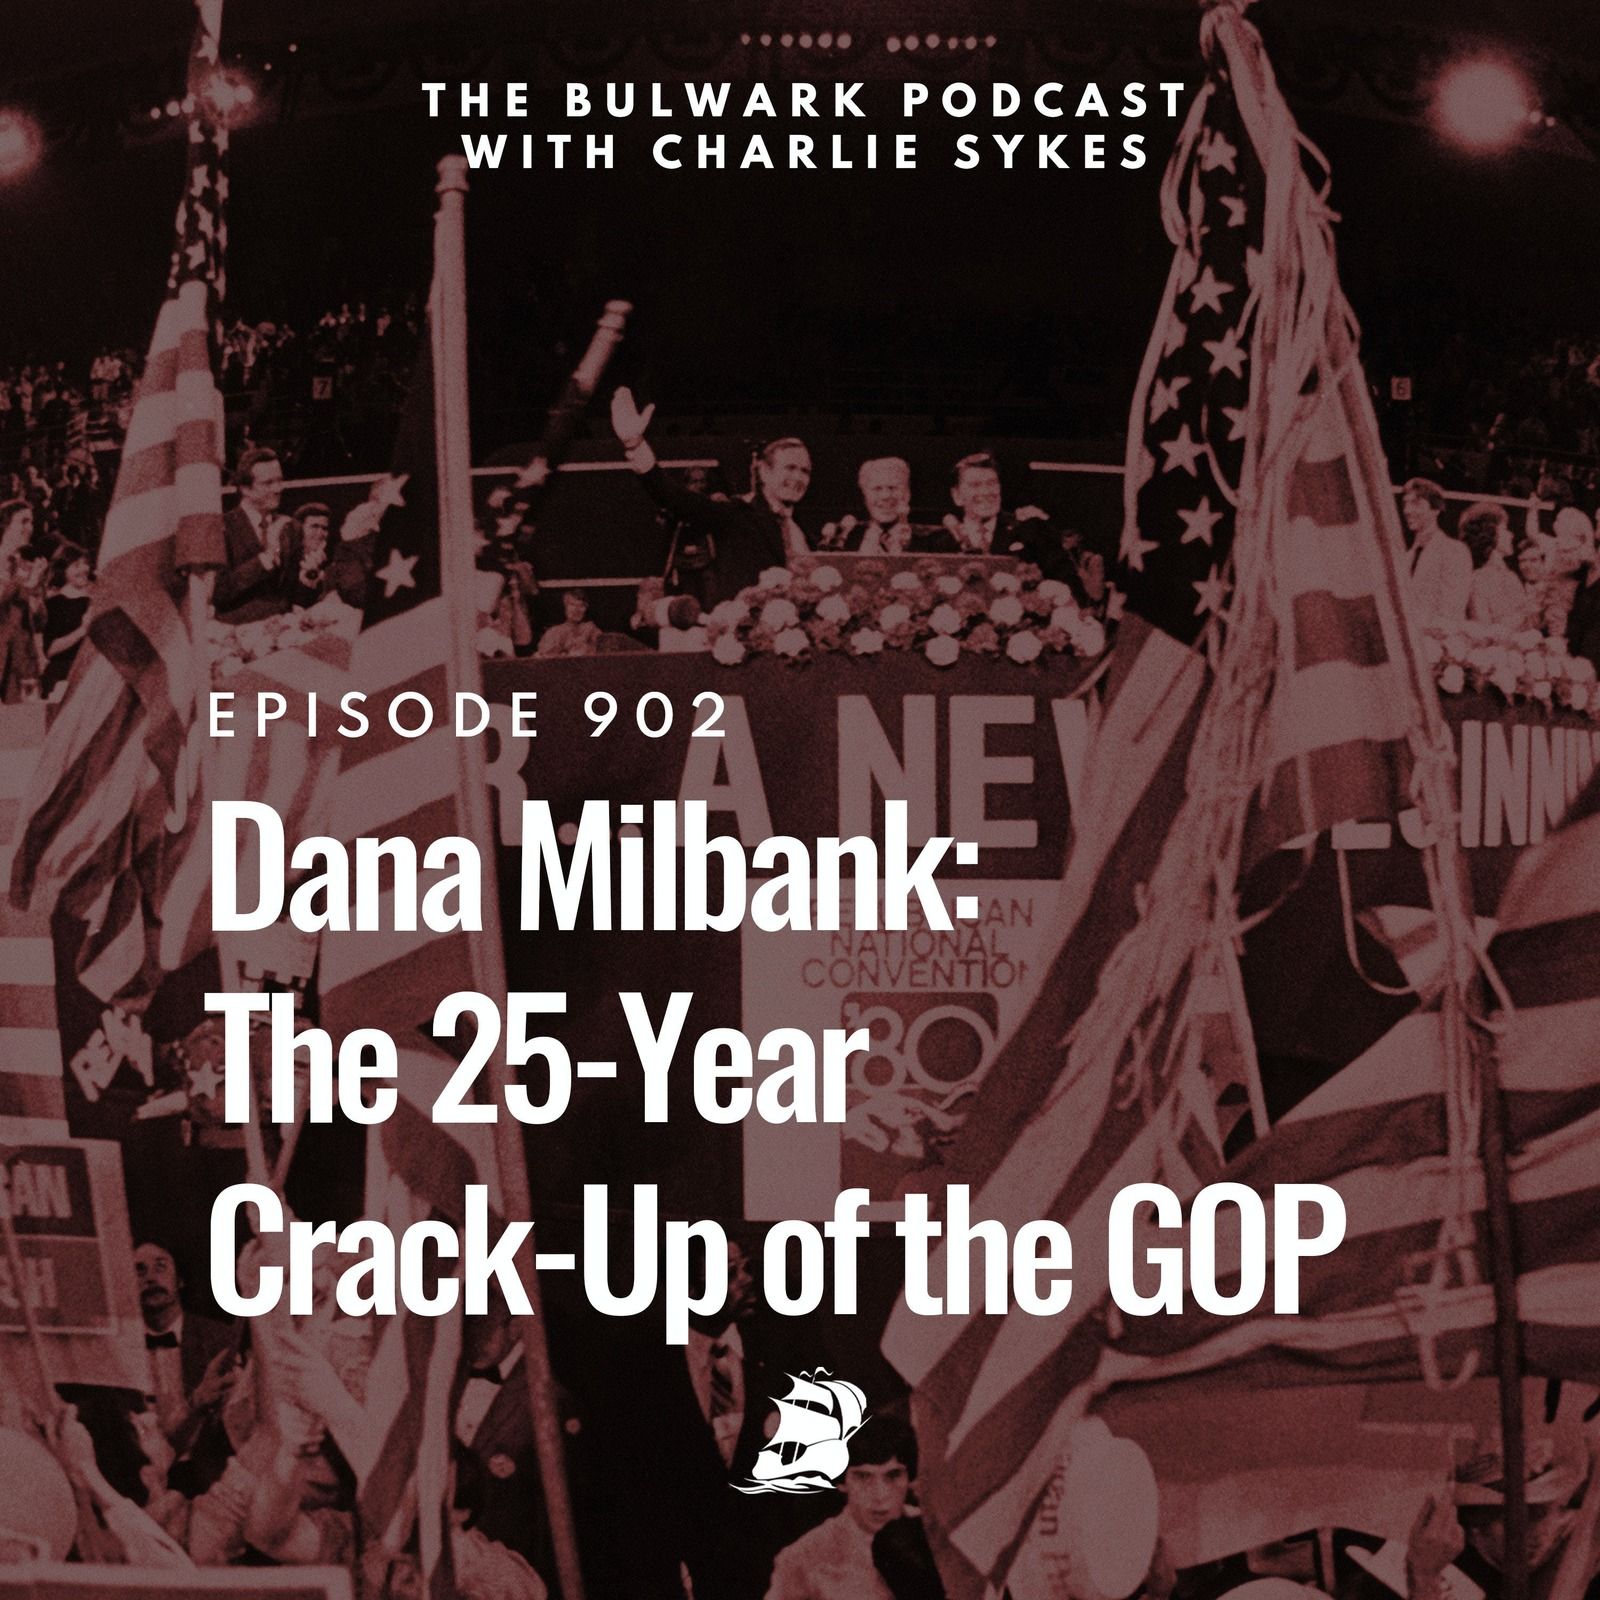 Dana Milbank: The 25-Year Crack-Up of the GOP